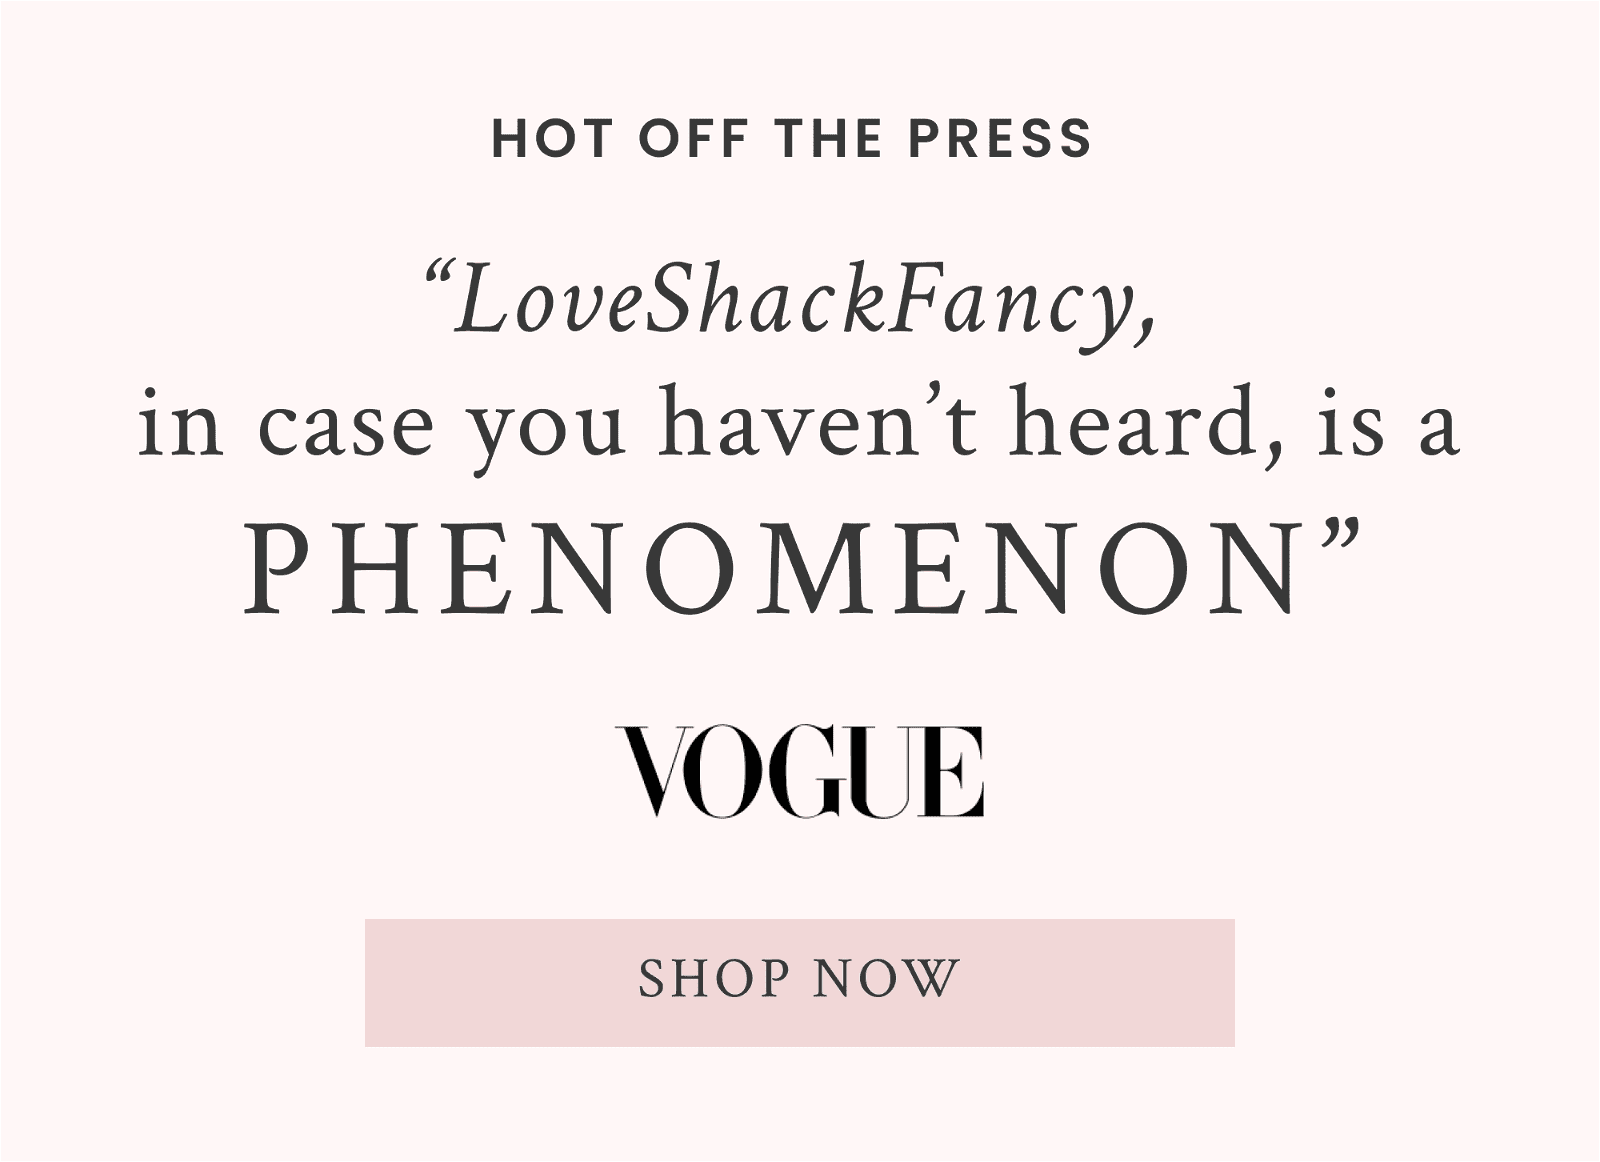 Hot off the press. "LoveShackFancy, in case you haven't heard, is a phenomenon" Vogue